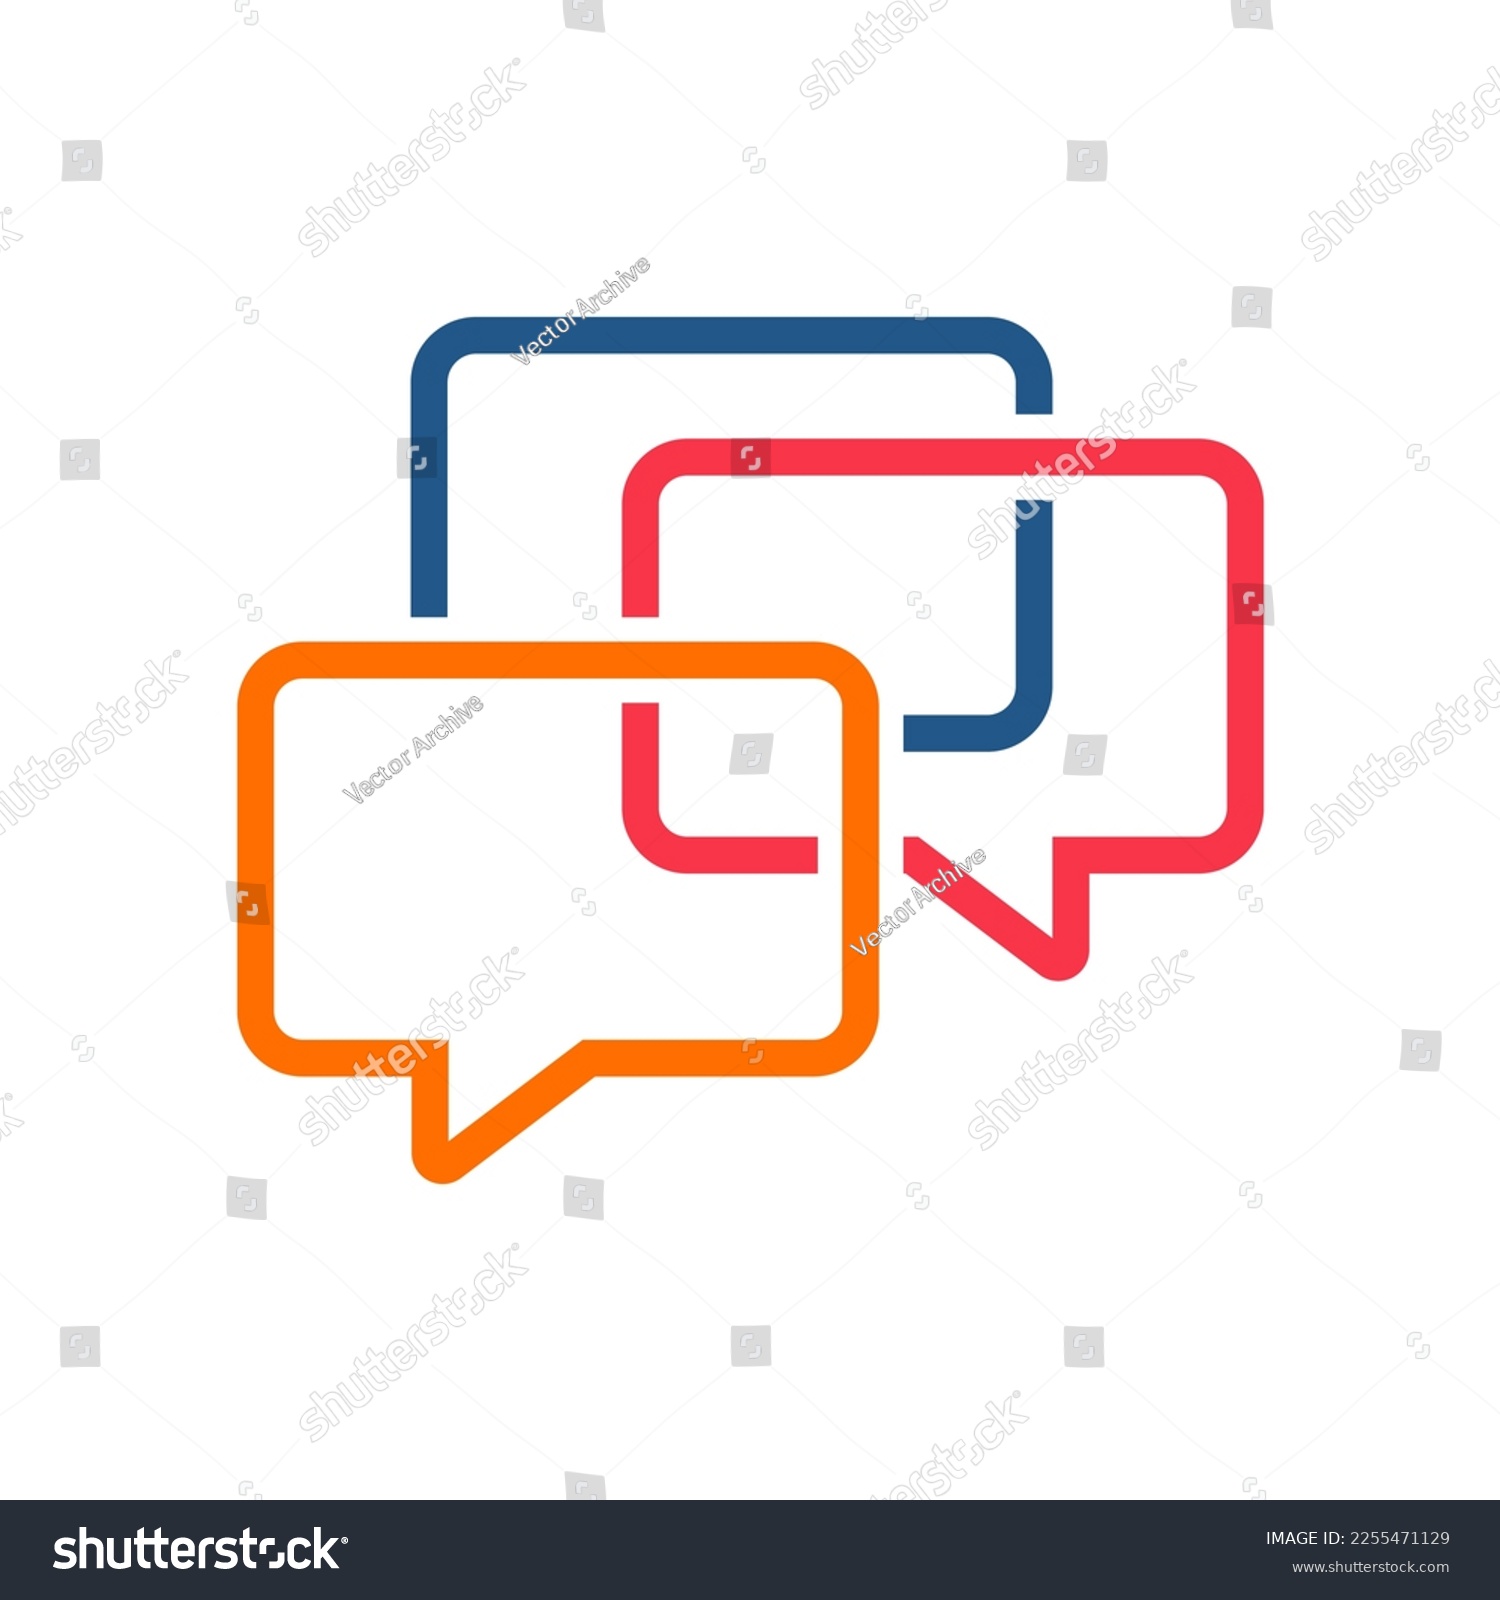 SVG of Communication Icon. Vector Speech Bubble Icon Illustration showing Communication, Conversation, Opinions svg